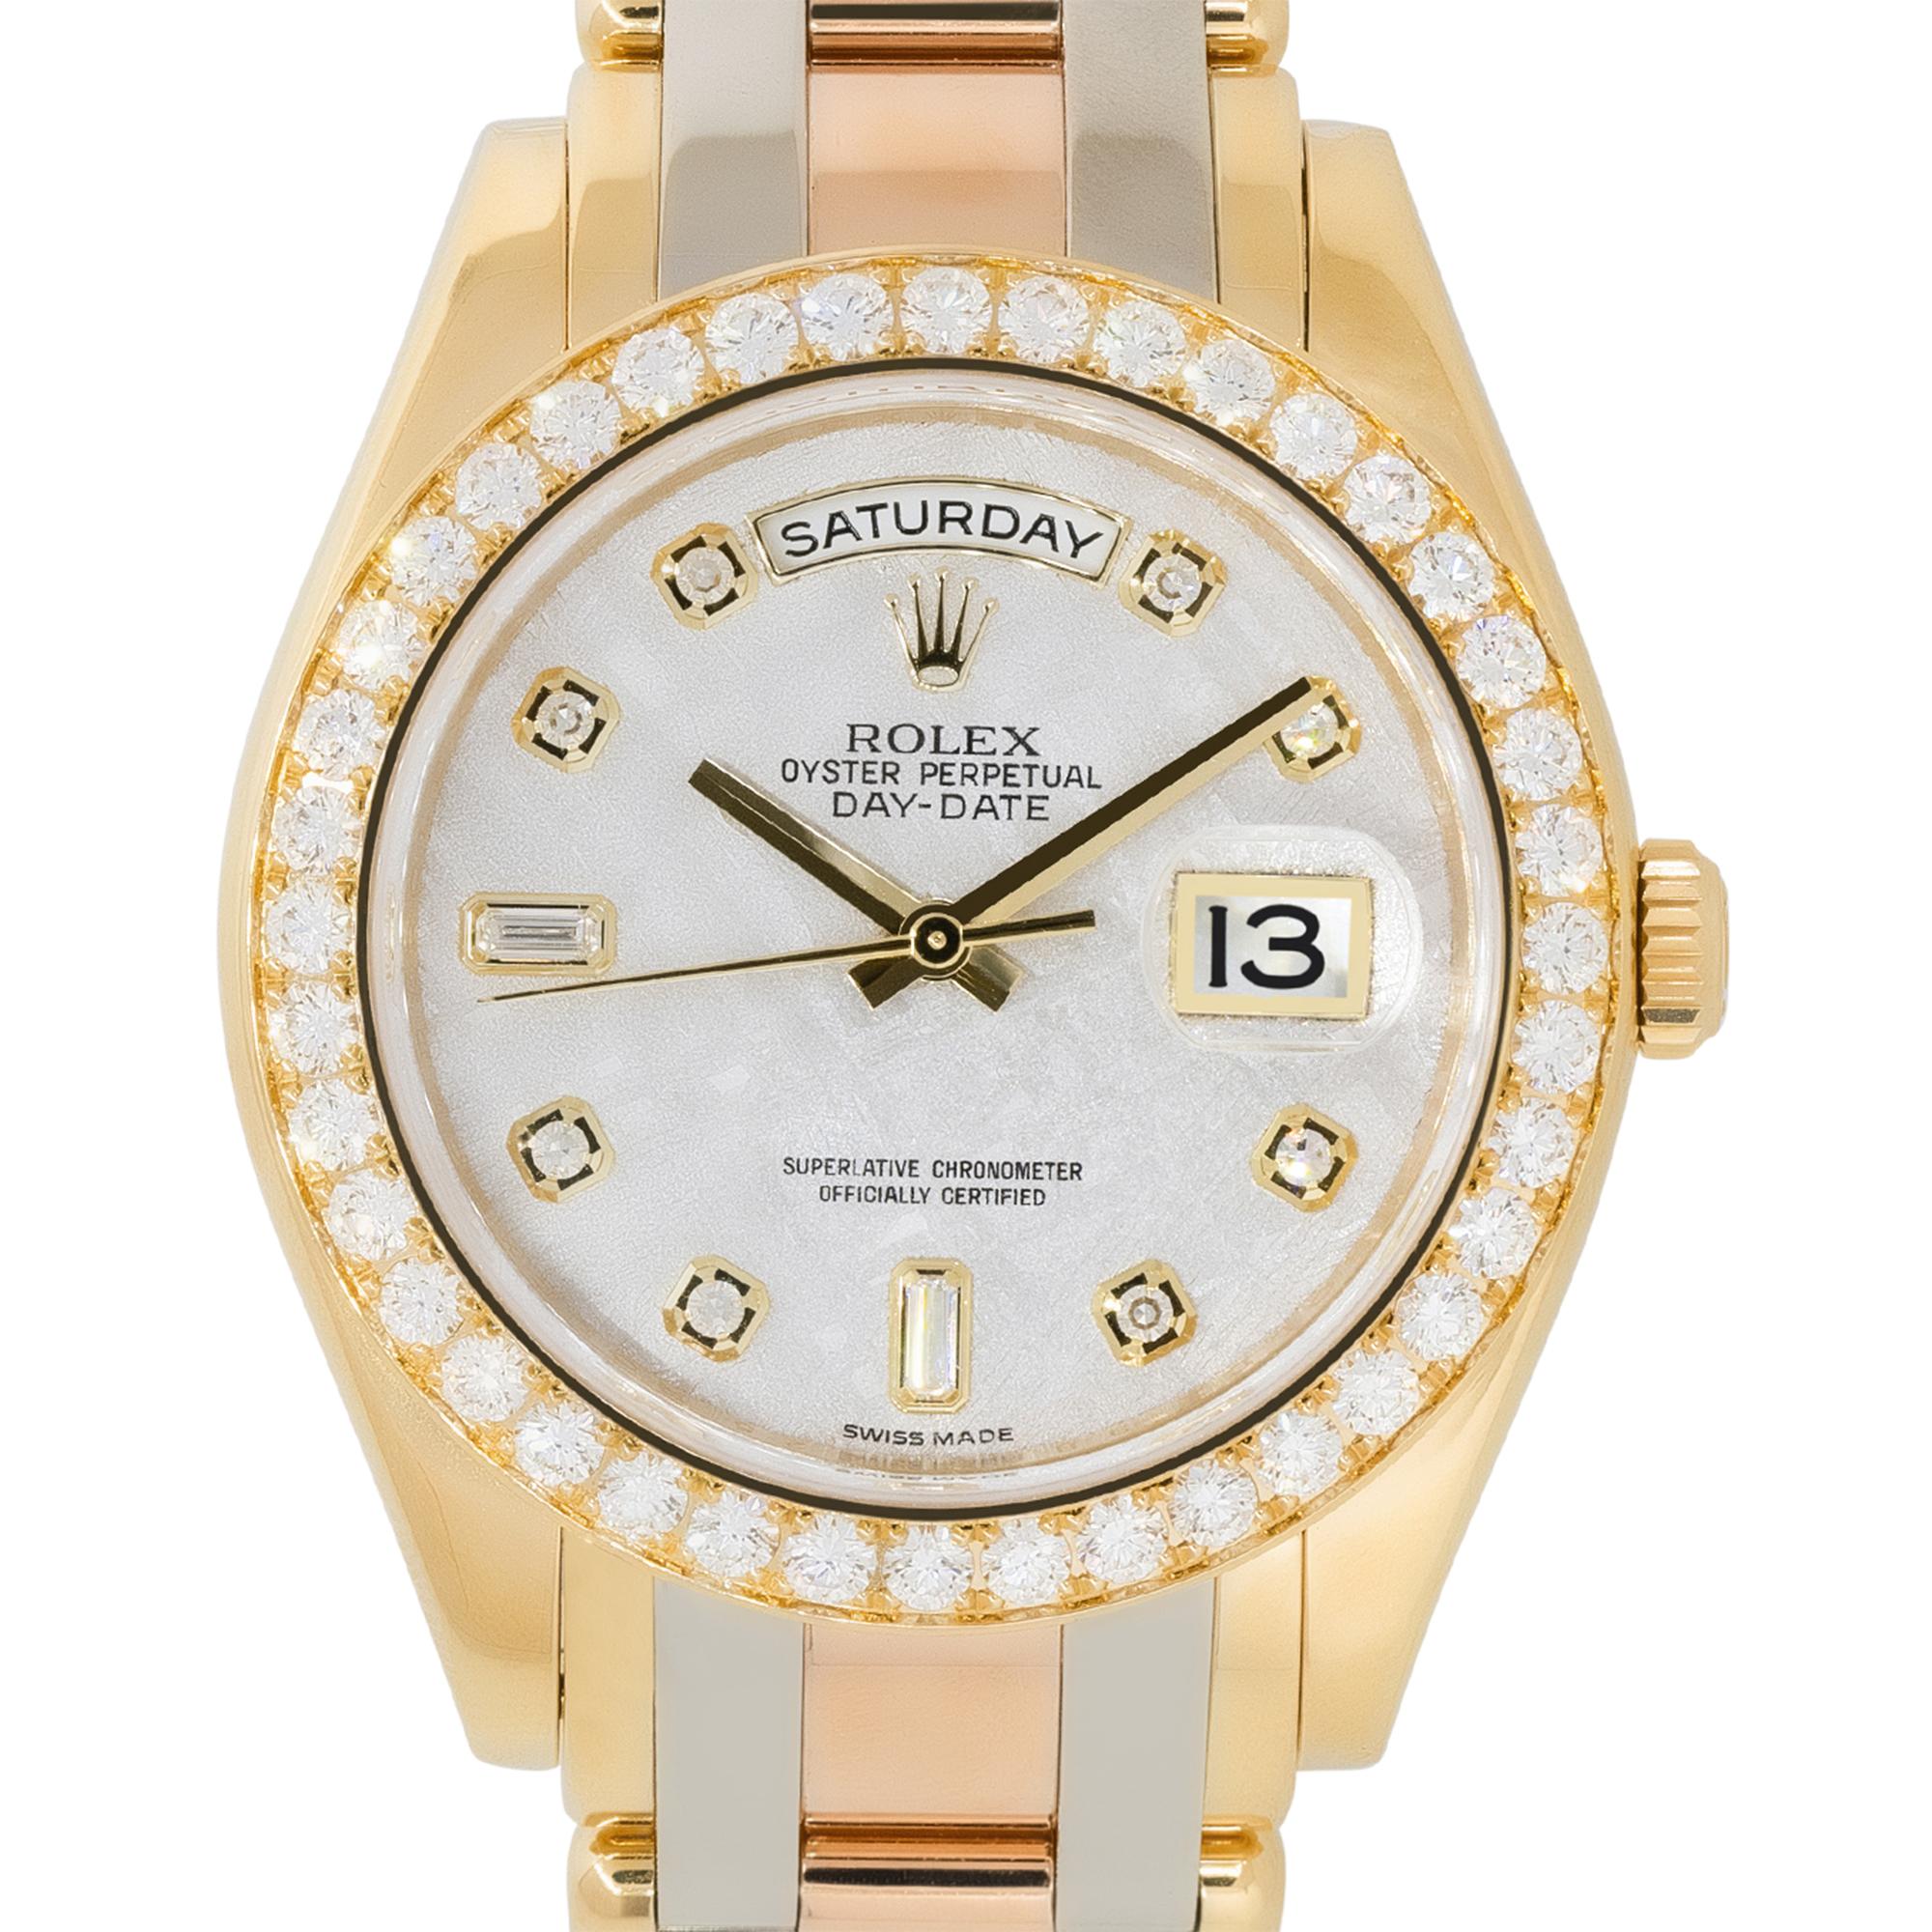 Brand: Rolex
Case Material: 18k White, Yellow and Rose gold
Case Diameter: 39mm
Crystal: Sapphire Crystal
Bezel: 18k Yellow Gold bezel with Diamonds
Dial: Meteorite Dial with yellow gold hands and Diamond hour markers. Date can be found at 3 o'clock